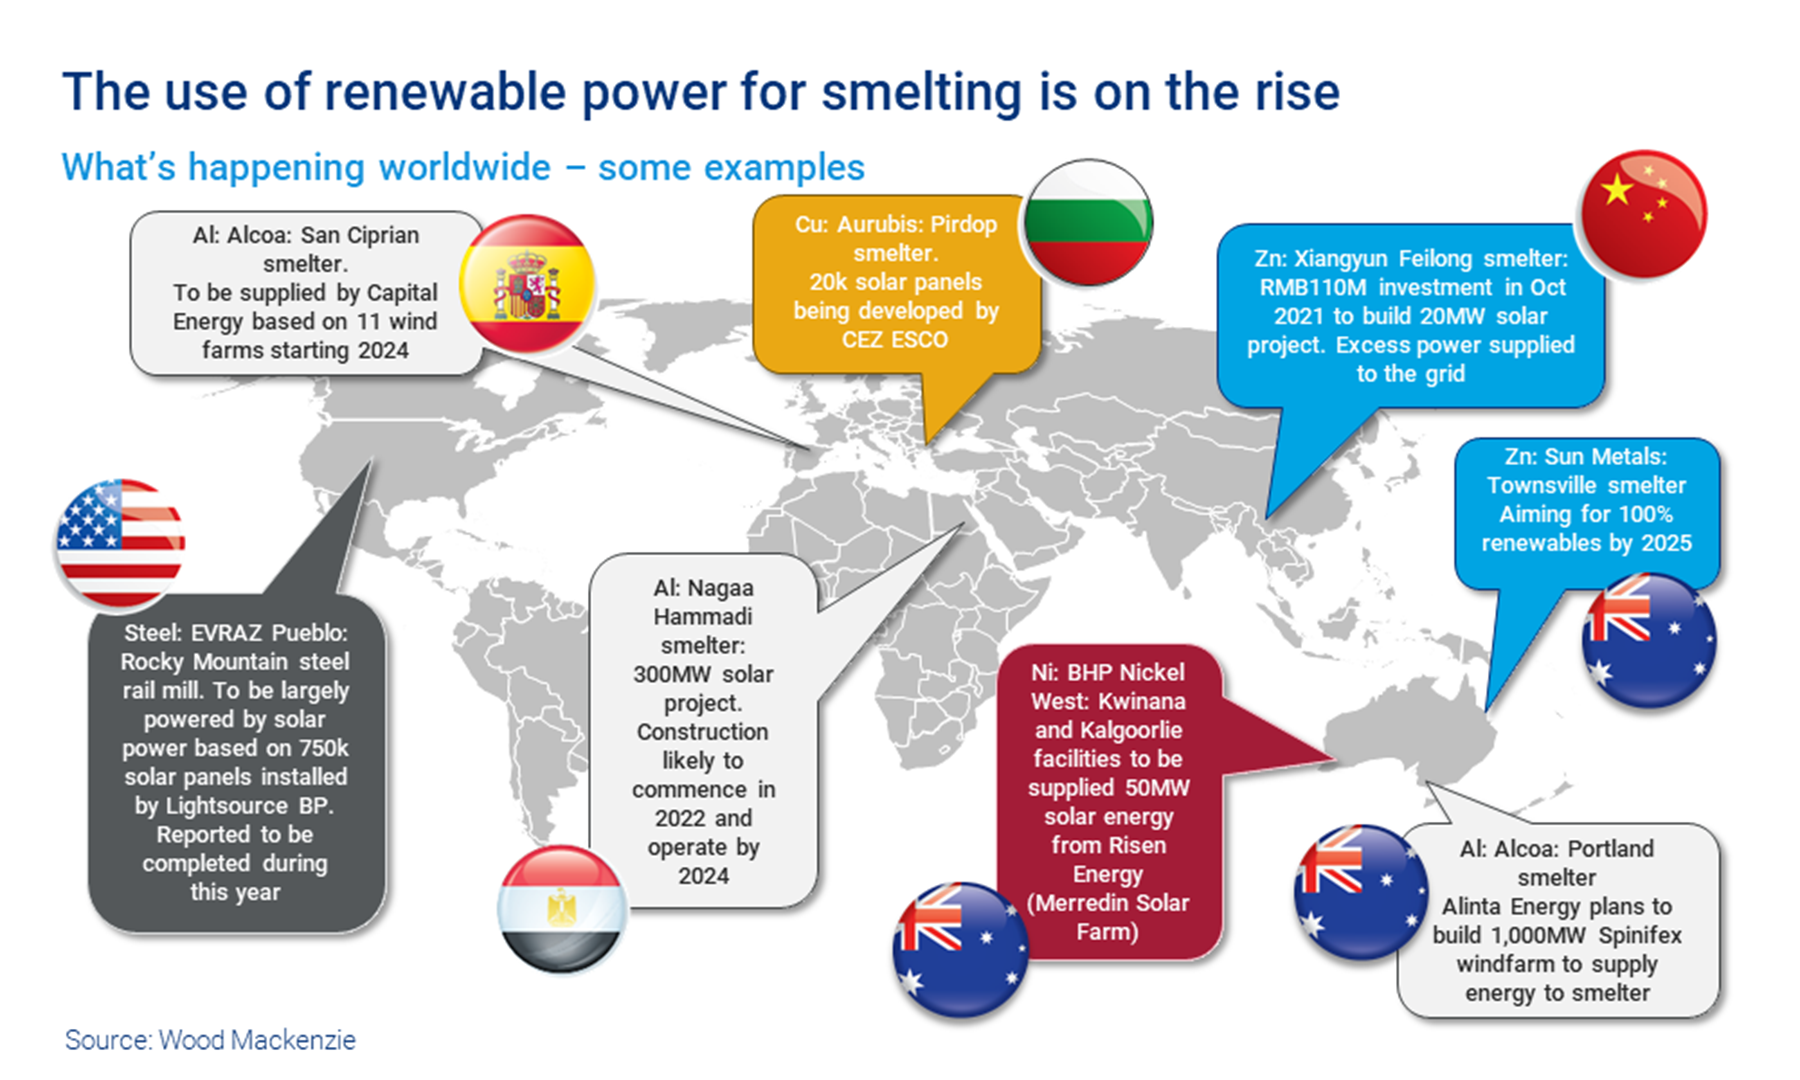 Chart shows the use of renewable power for smelting is on the rise